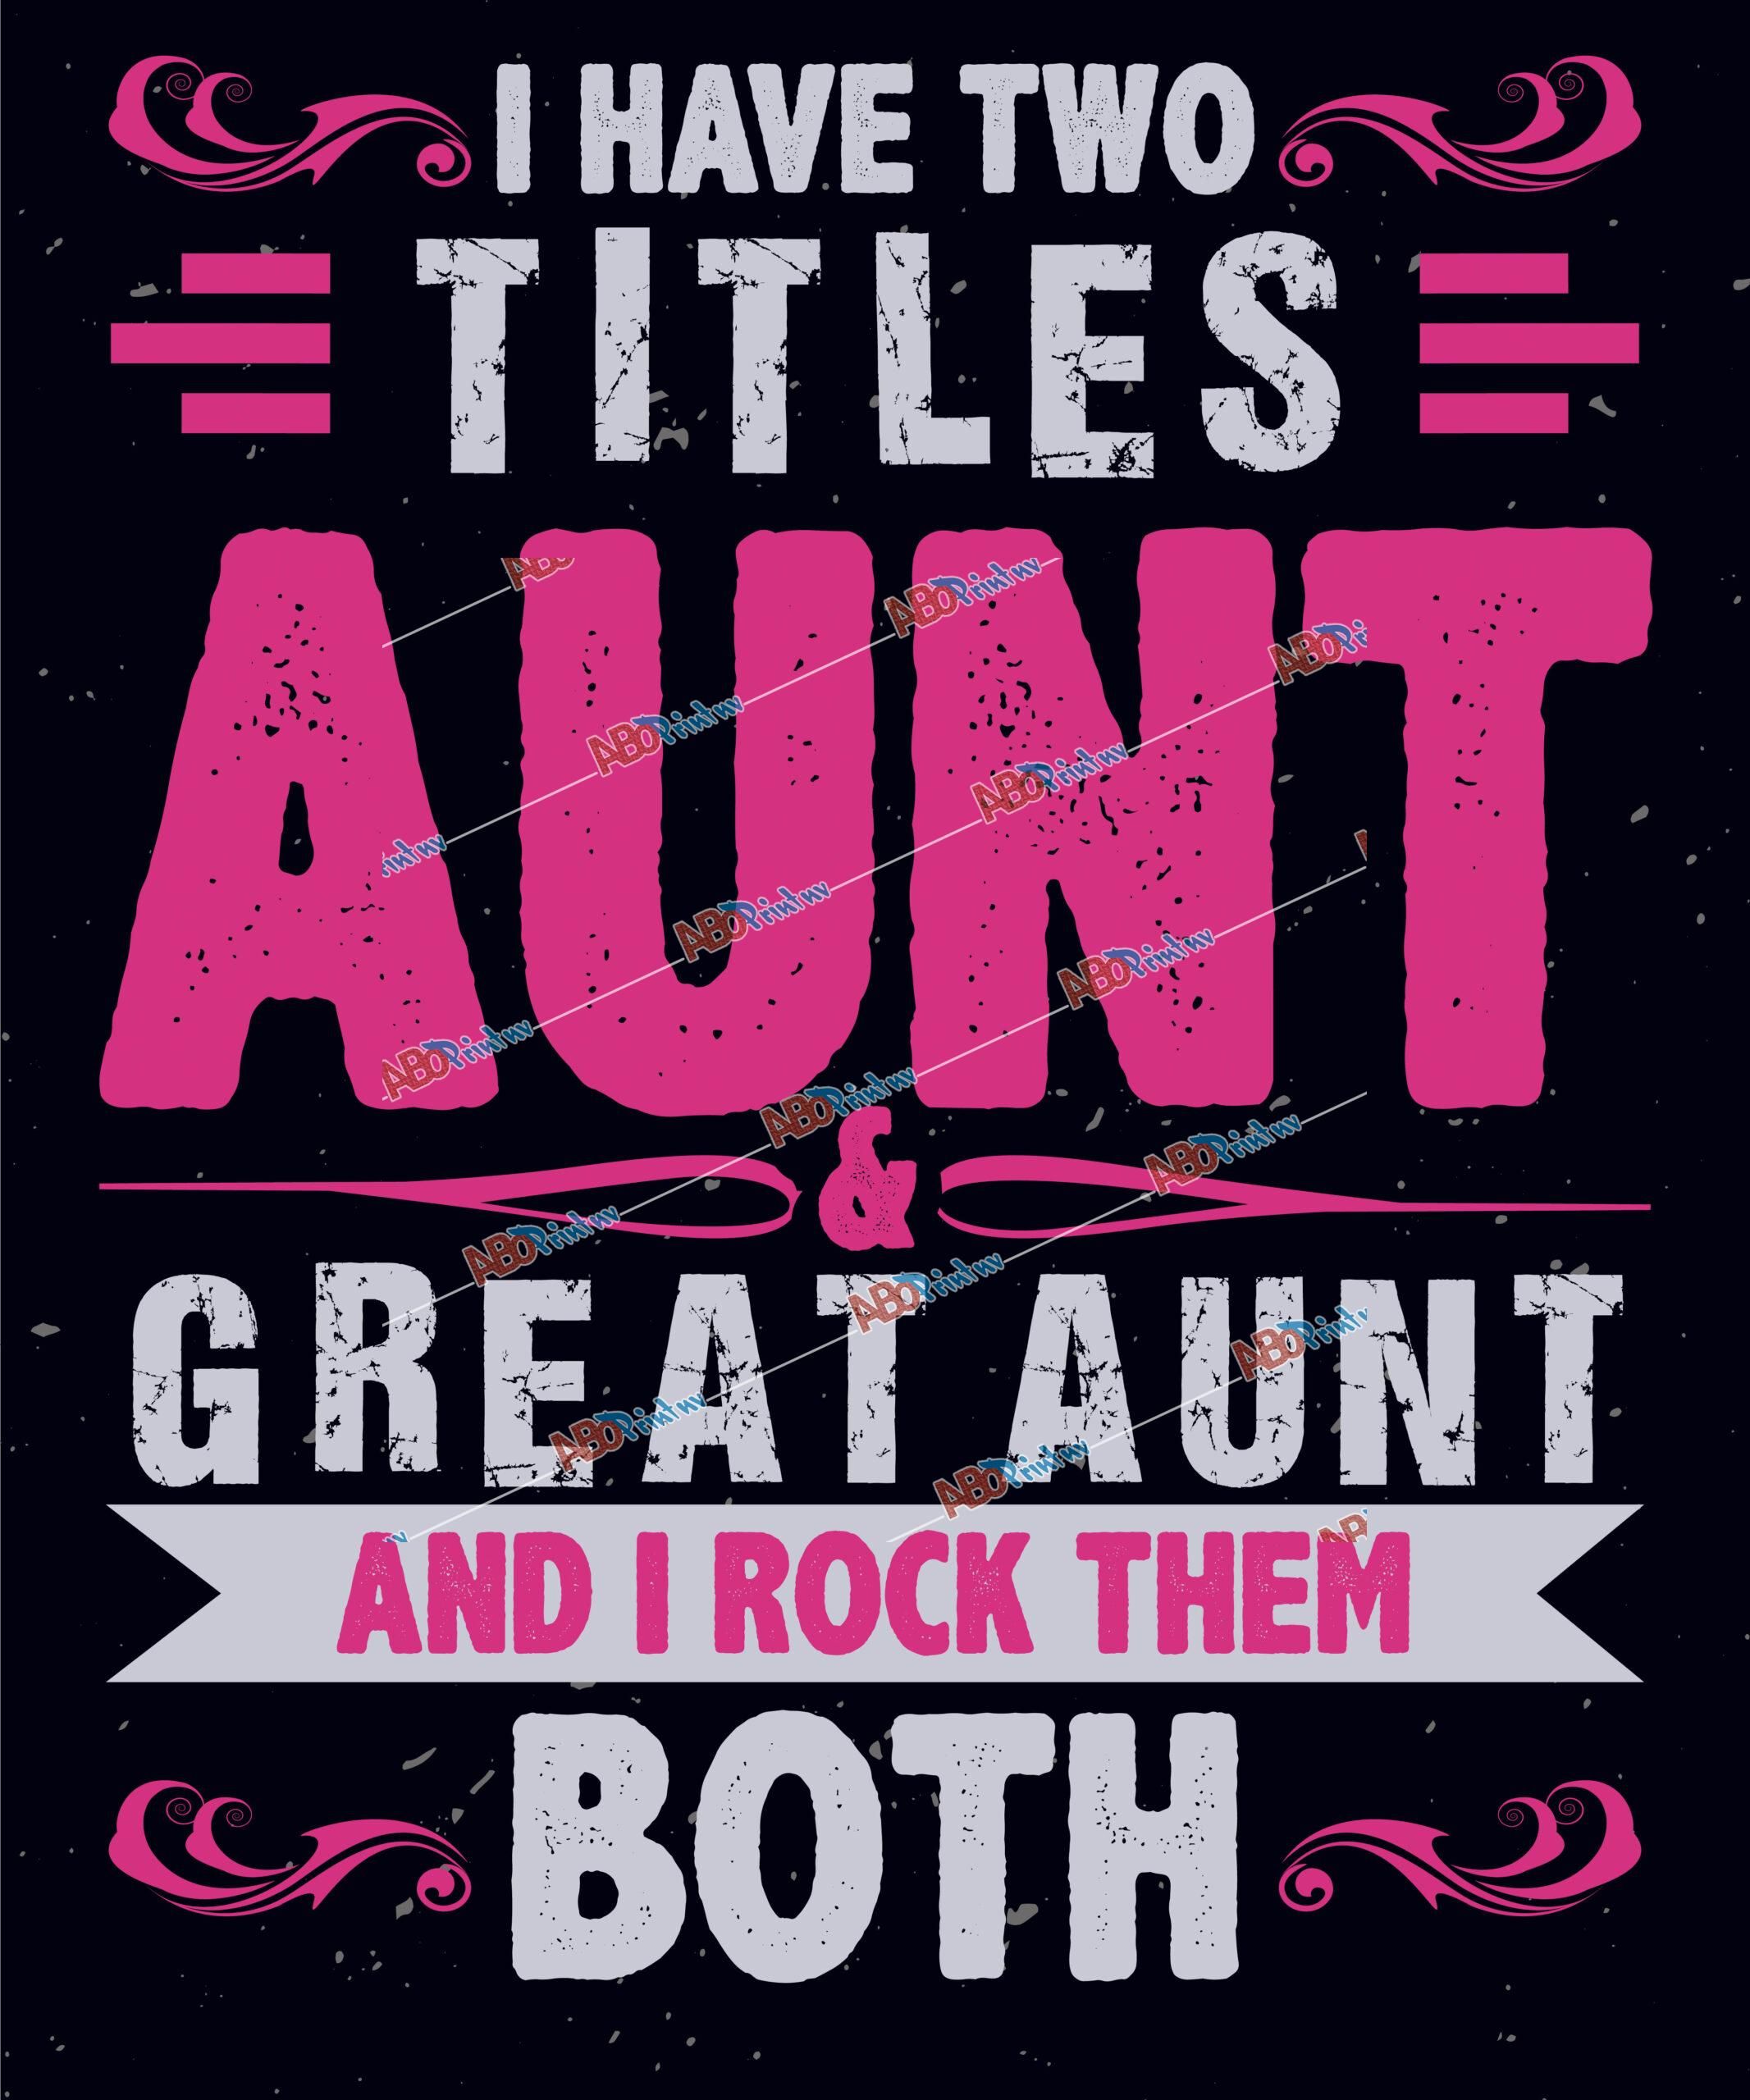 Every great auntie says the f word